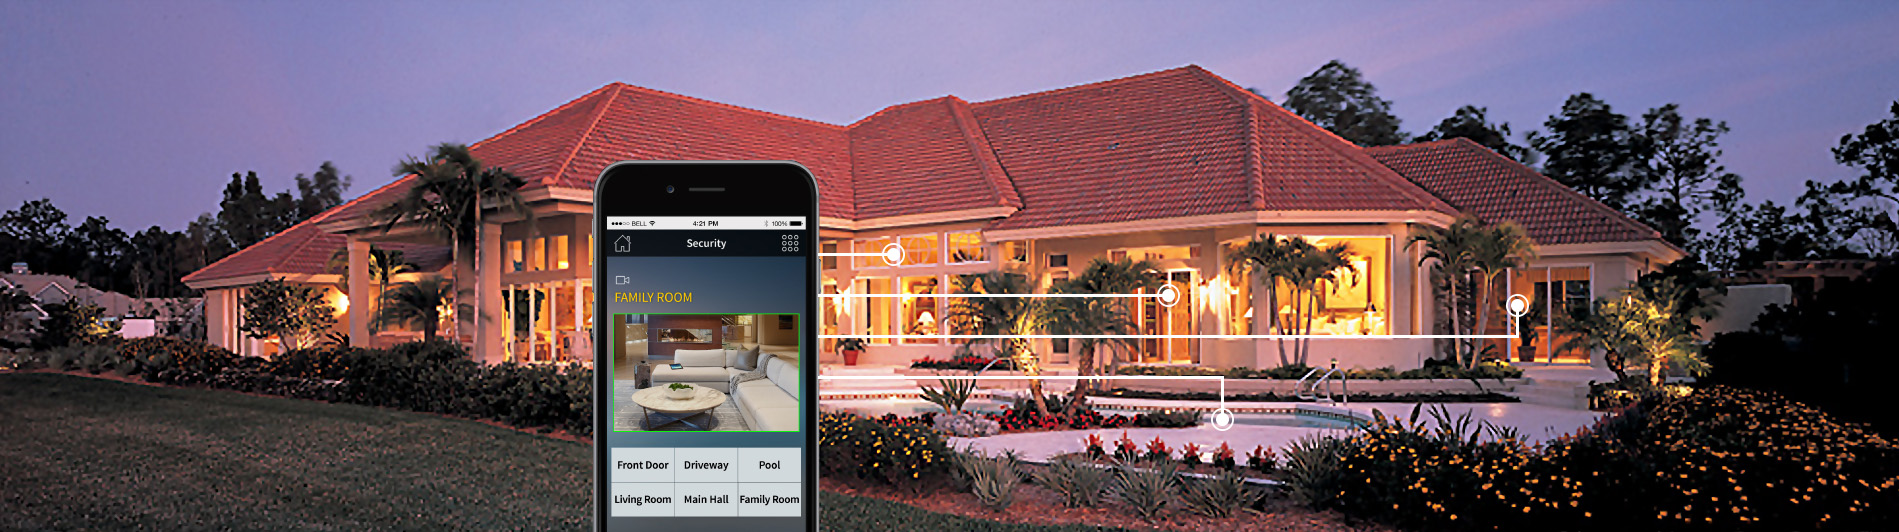 Crestron Automated Home System